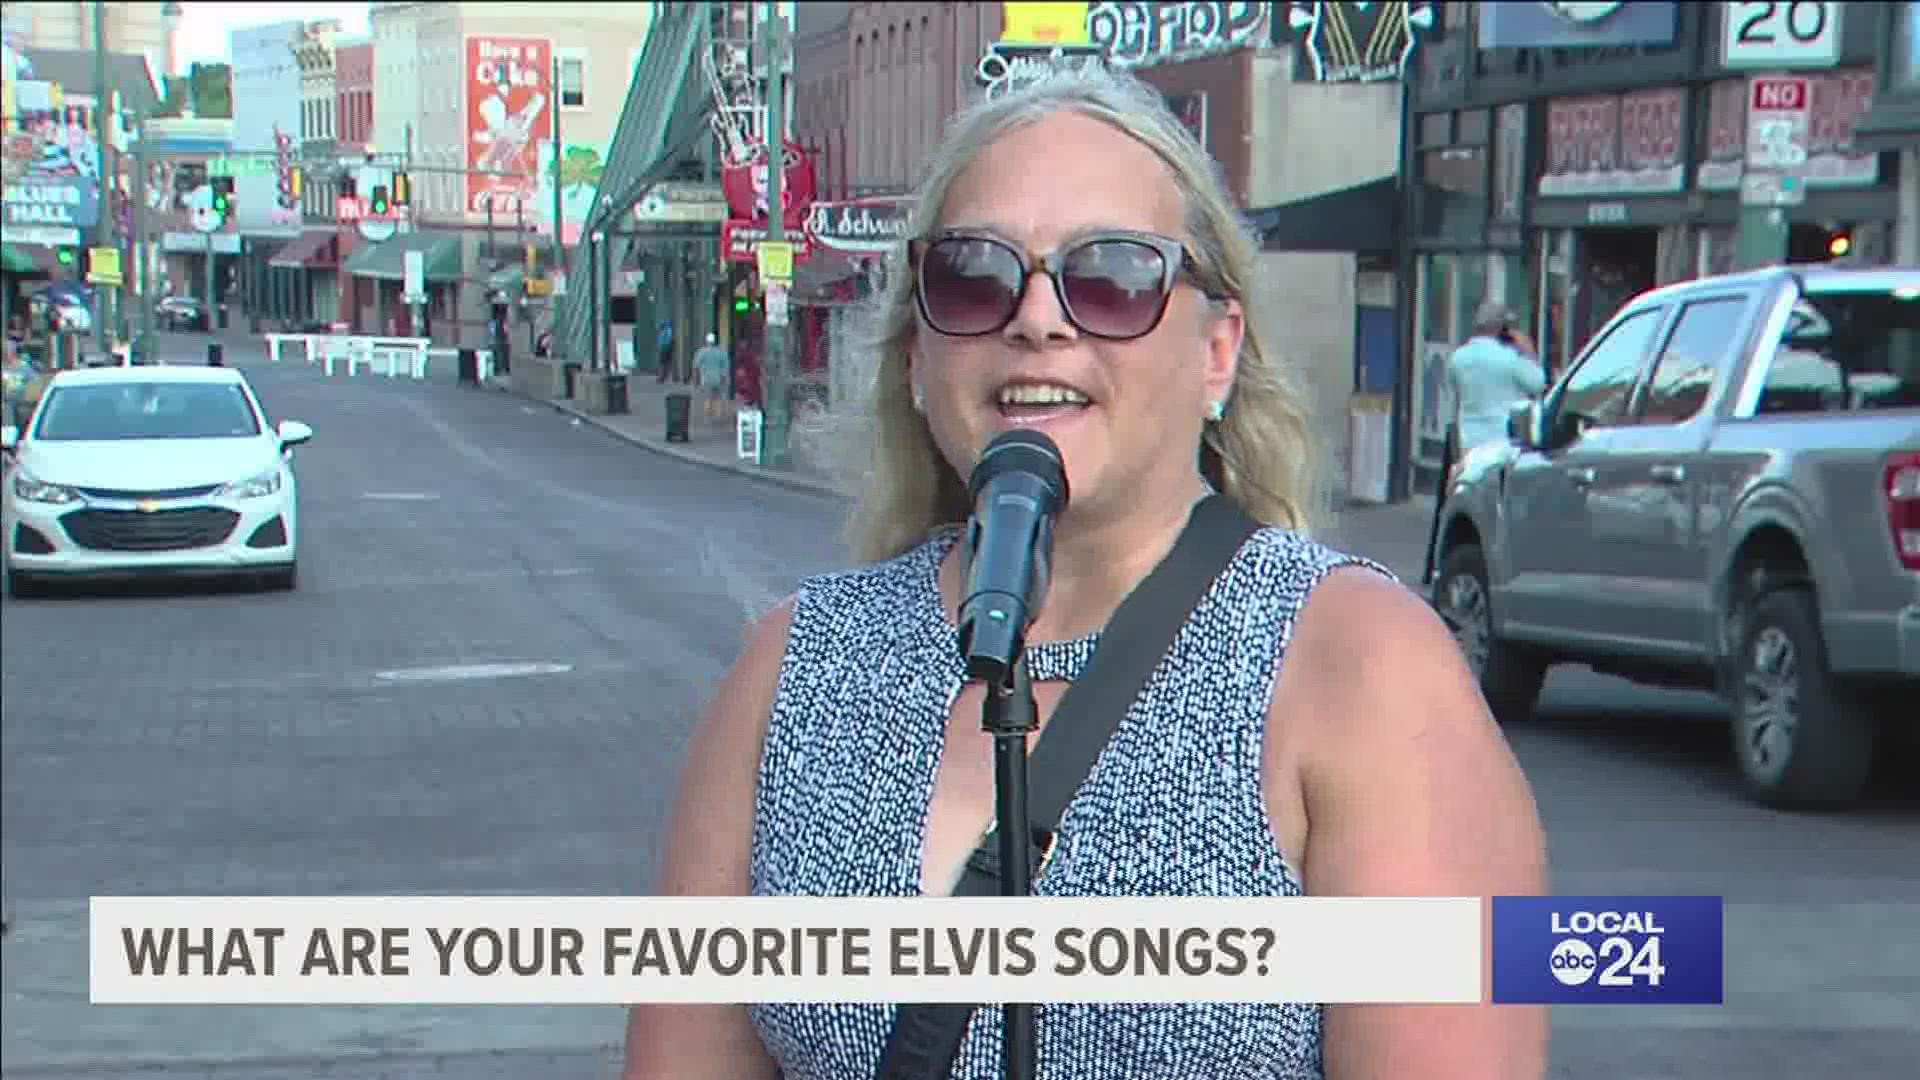 Some of the highlights of Elvis Week in Memphis include concerts, tribute artists, and the candlelight vigil.